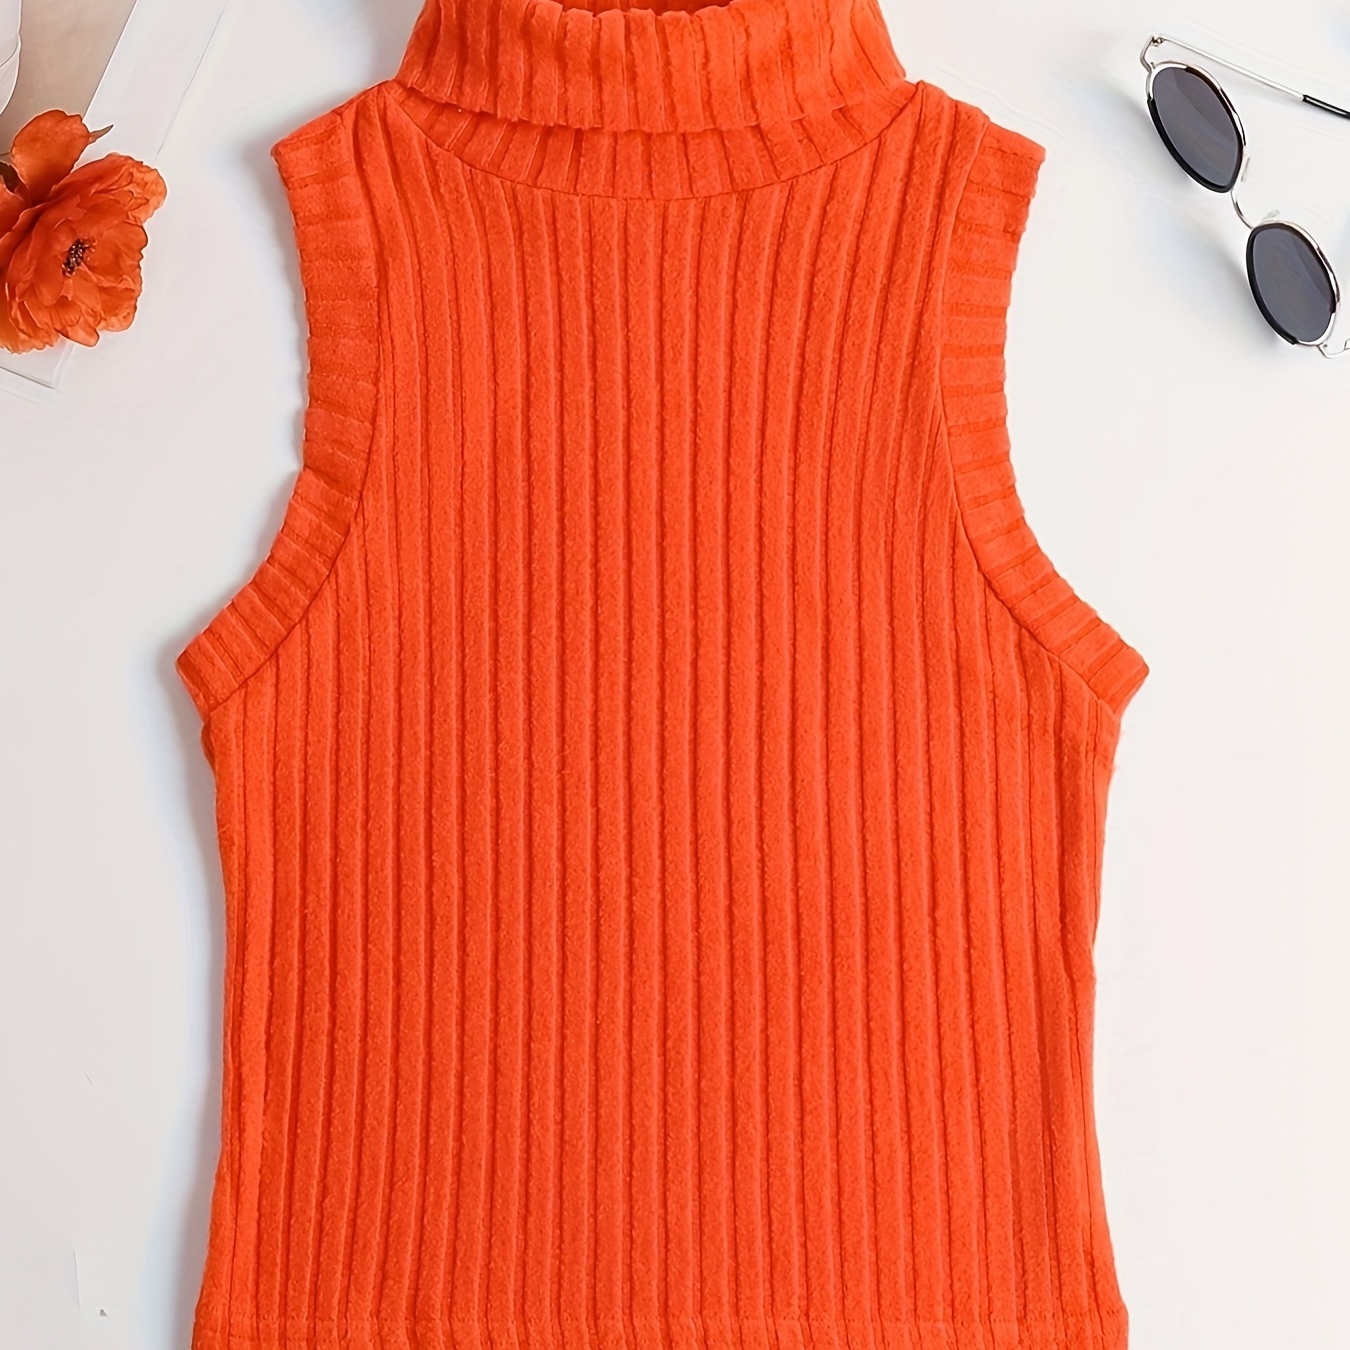 

Rib Knit High Neck Sweater Knitted Top, Sleeveless Casual Tank Top, Women's Clothing